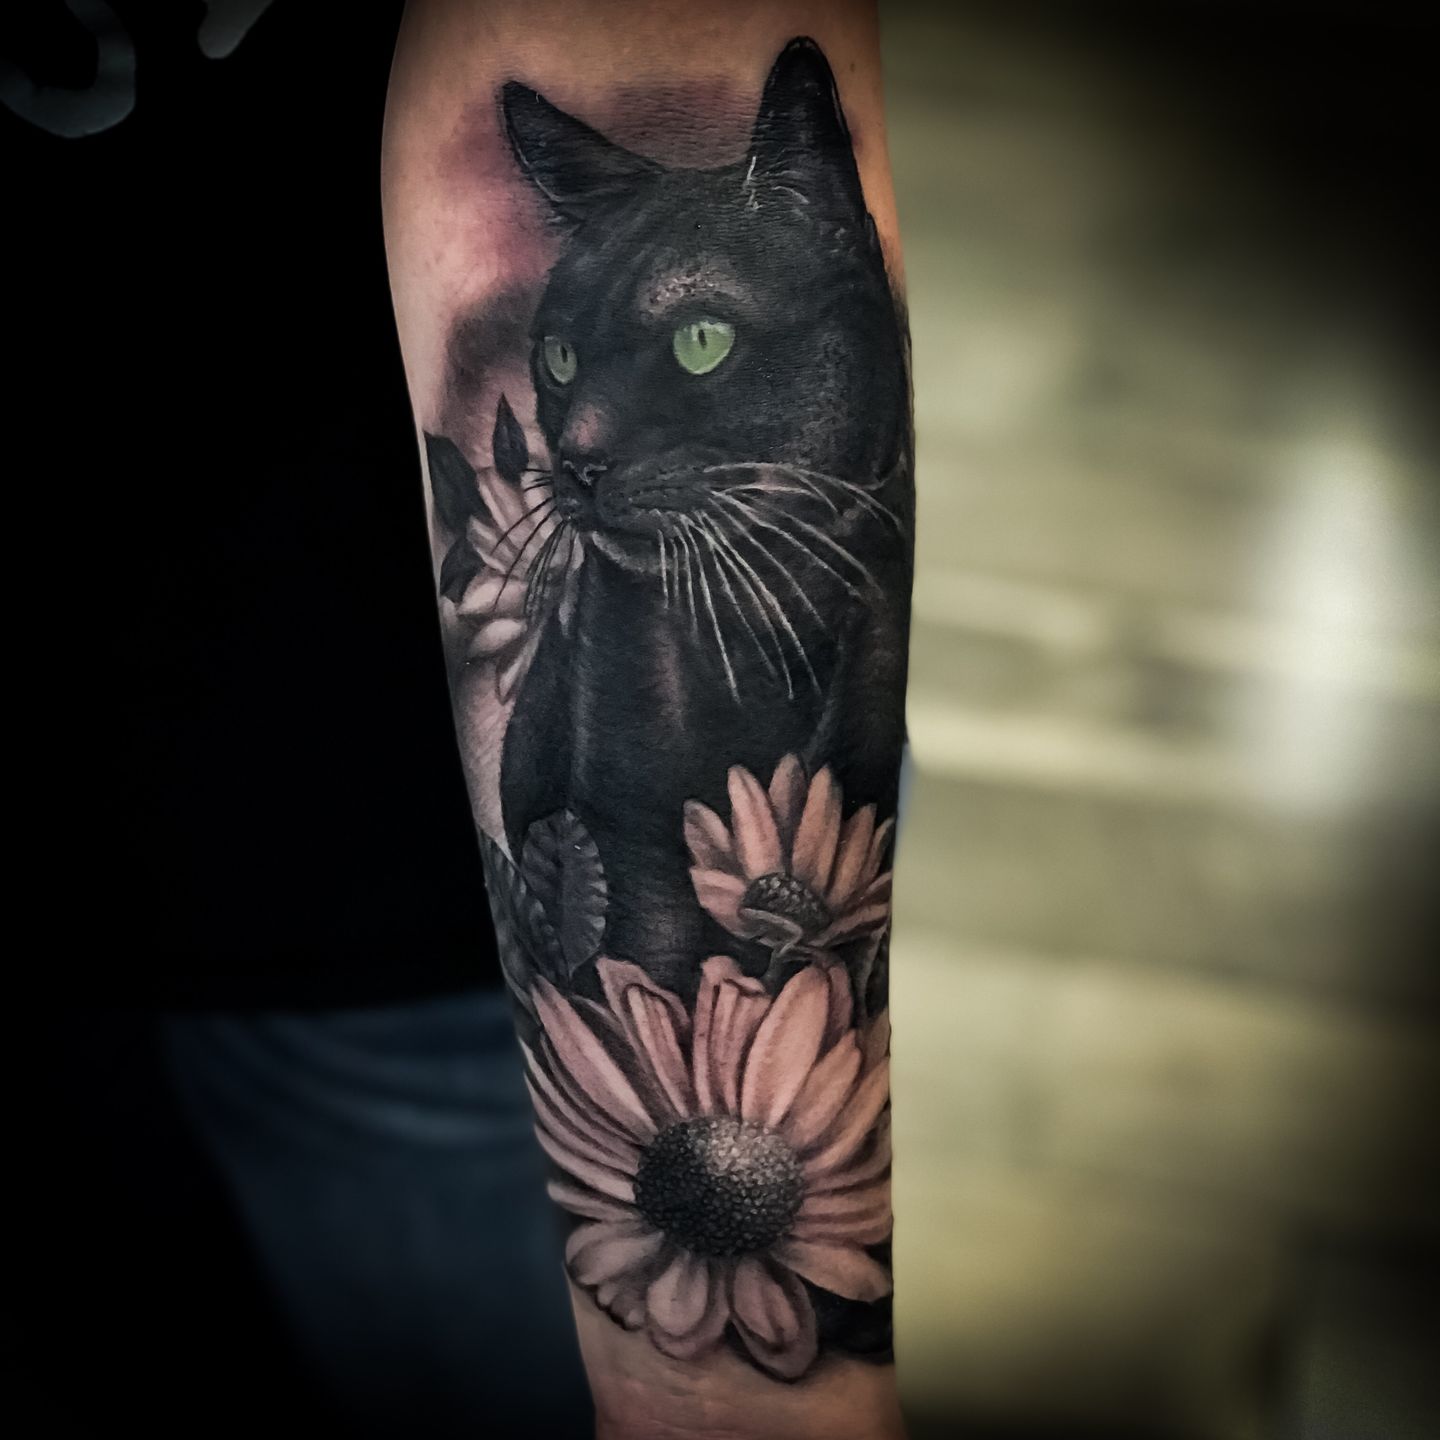 The 40 best cat tattoo designs that are on trend right now 